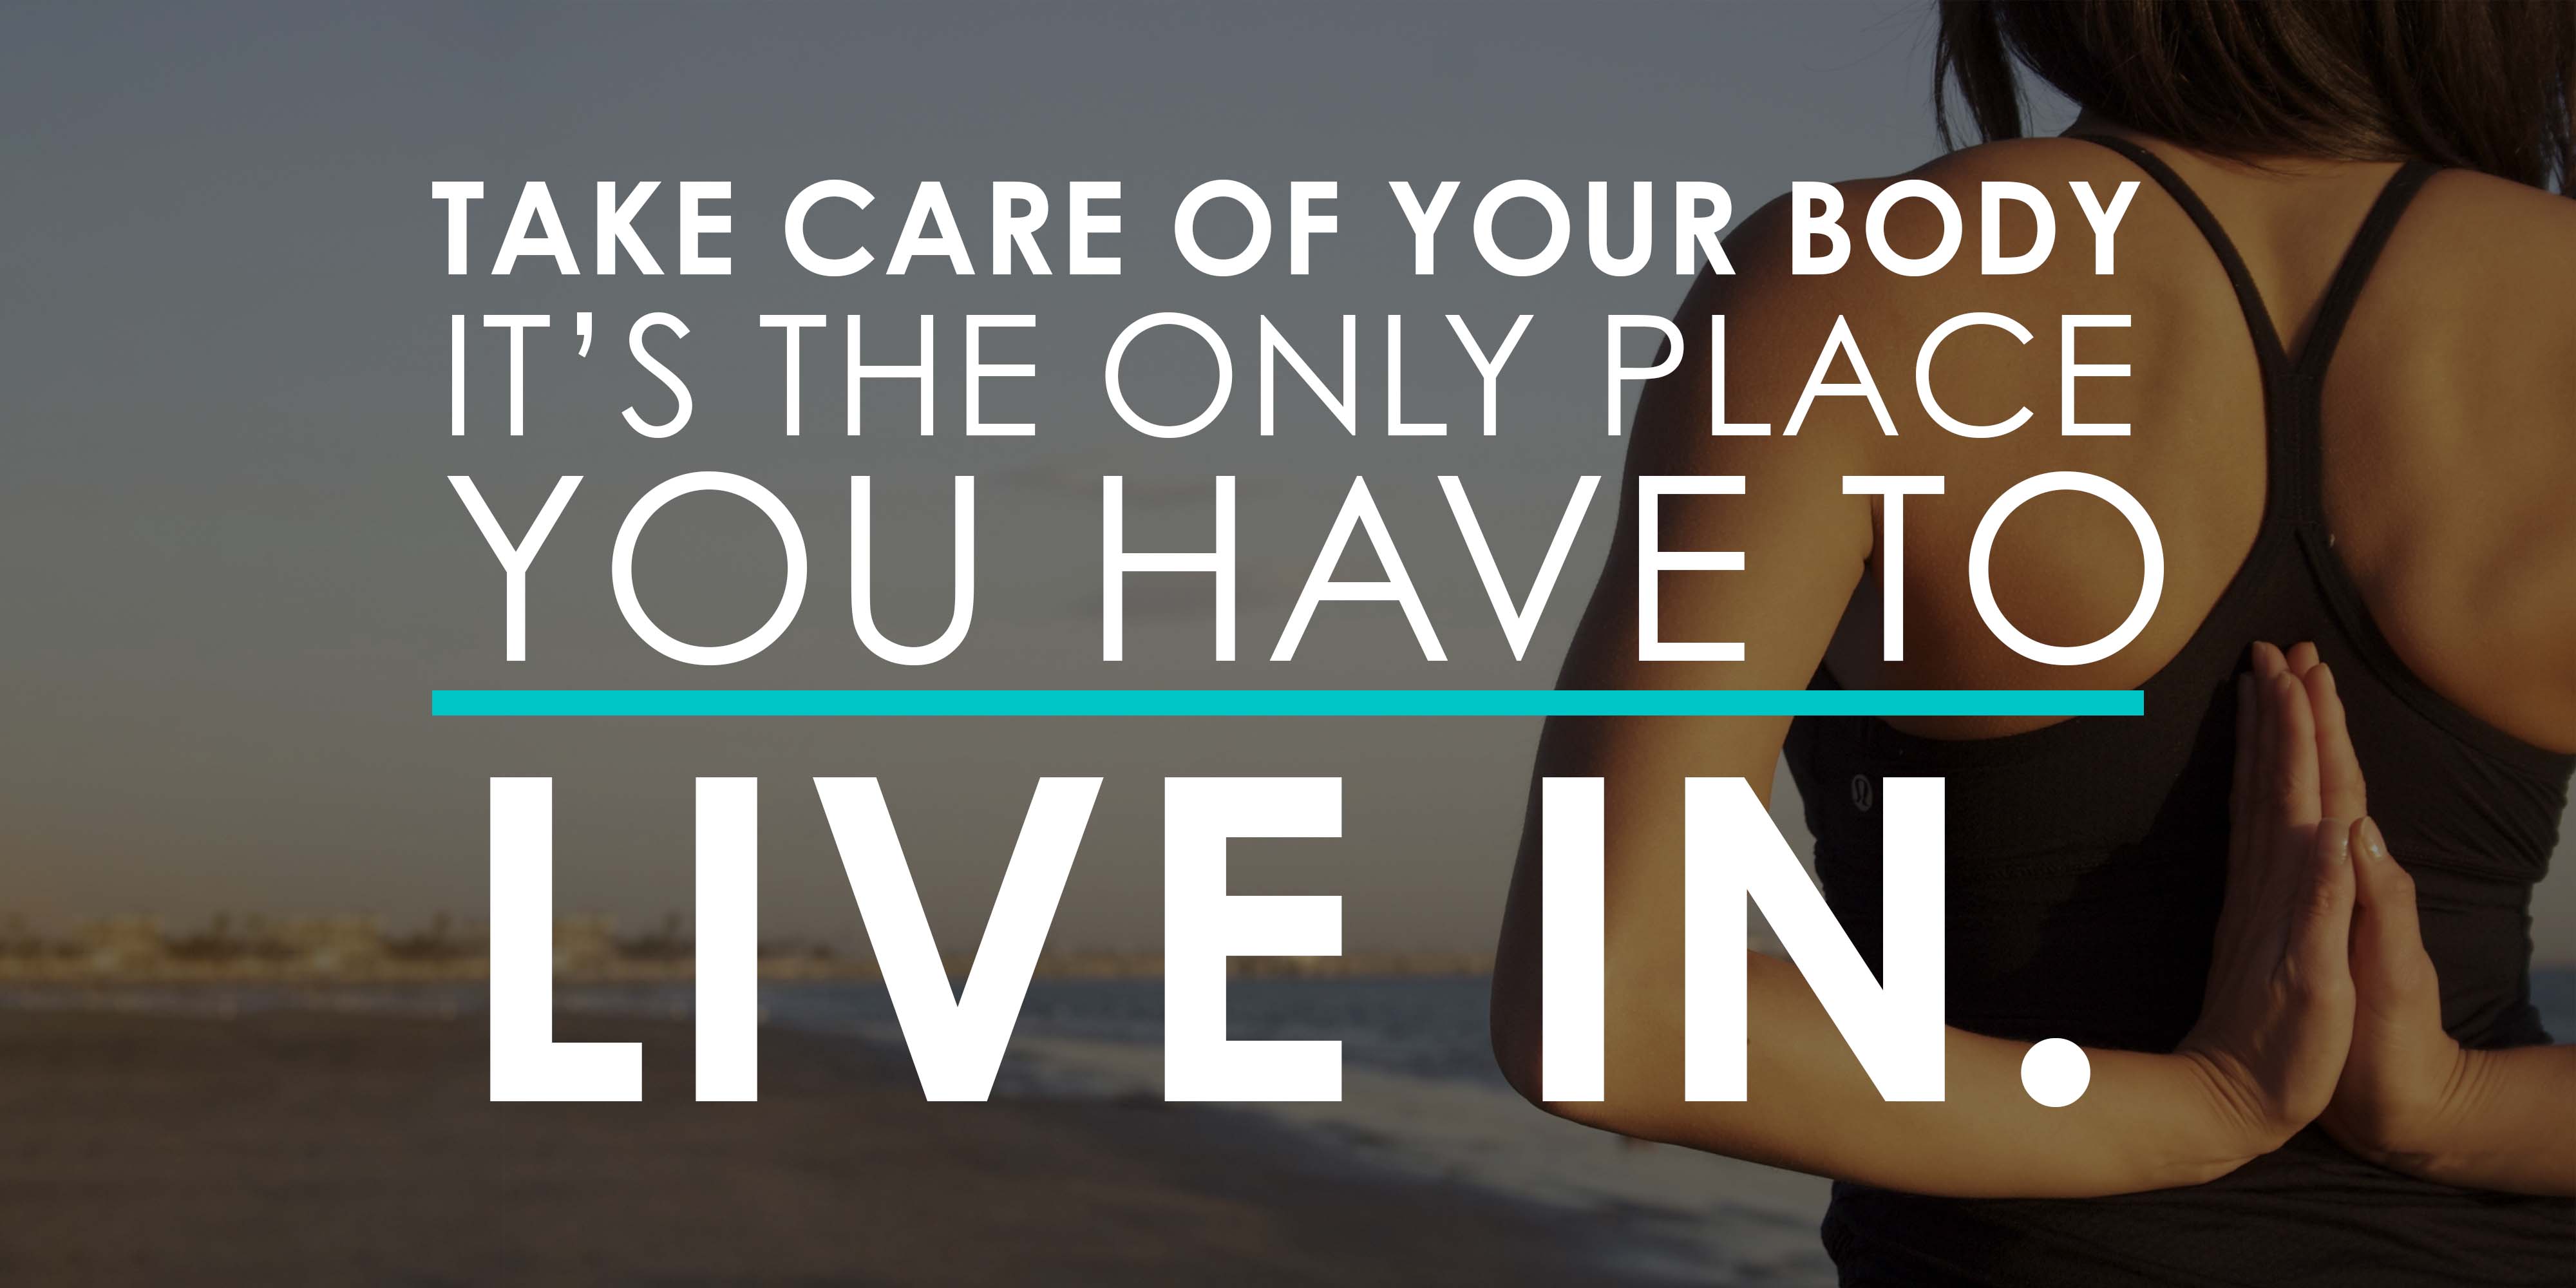 Take Care of Your Body It's the only place you have to live in